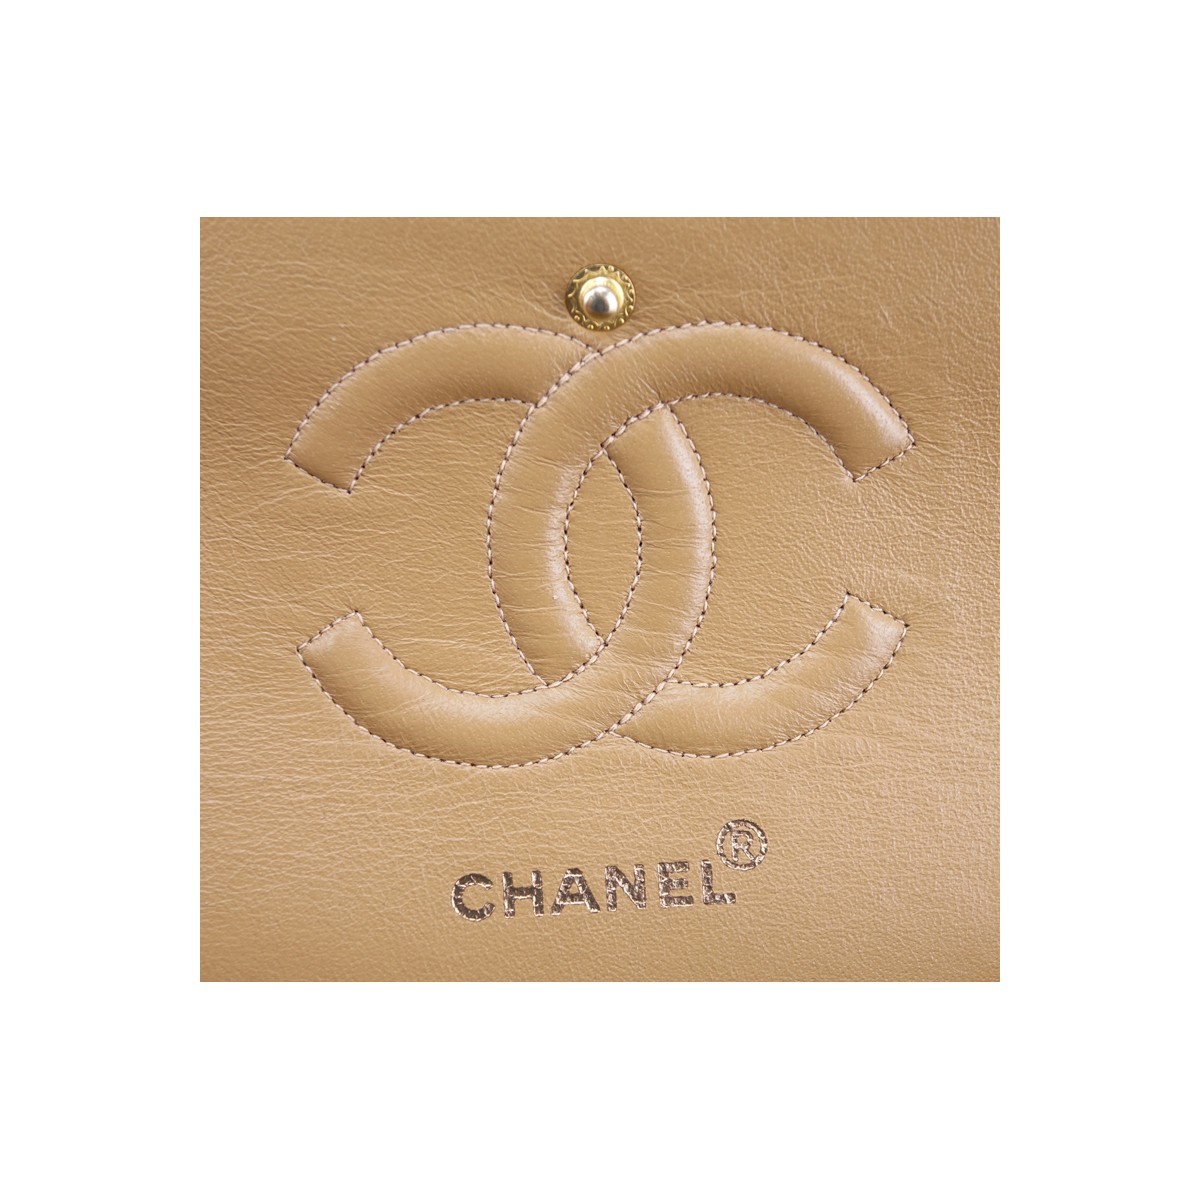 Chanel Dark Beige Quilted Leather Classic Double Flap 26 Handbag. Gold tone hardware, matching leather interior with patch and zippered pockets.